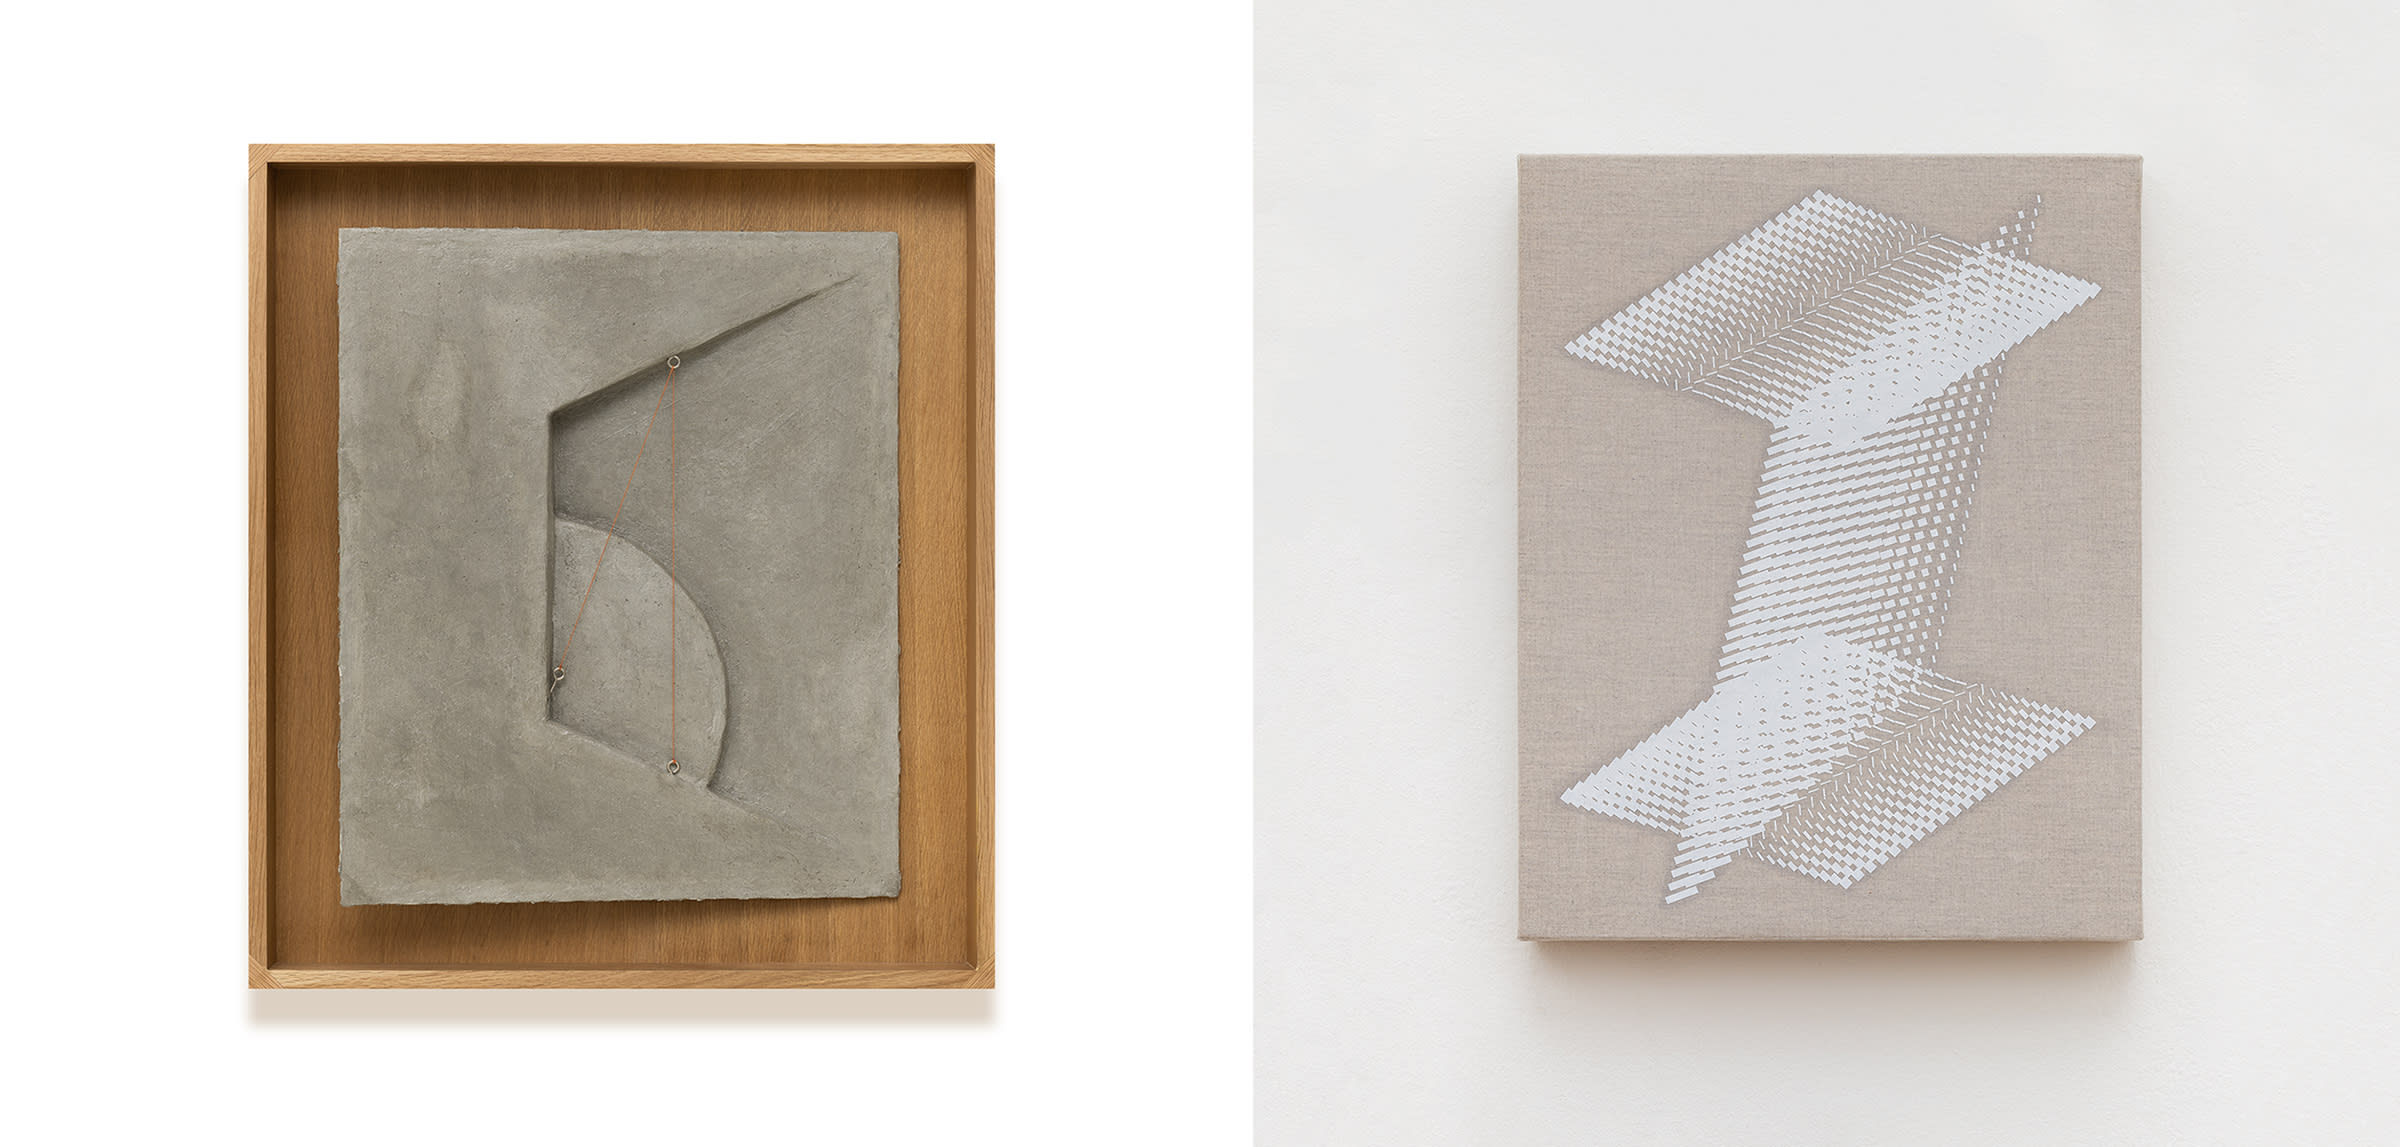 Left: Genevieve Chua, Pathway #2, Steadfast, 2022. Right: Genevieve Chua, Breeze Blocks #35, 2022. Both images © Genevieve Chua / STPI. Courtesy of the artist and STPI – Creative Workshop & Gallery, Singapore.